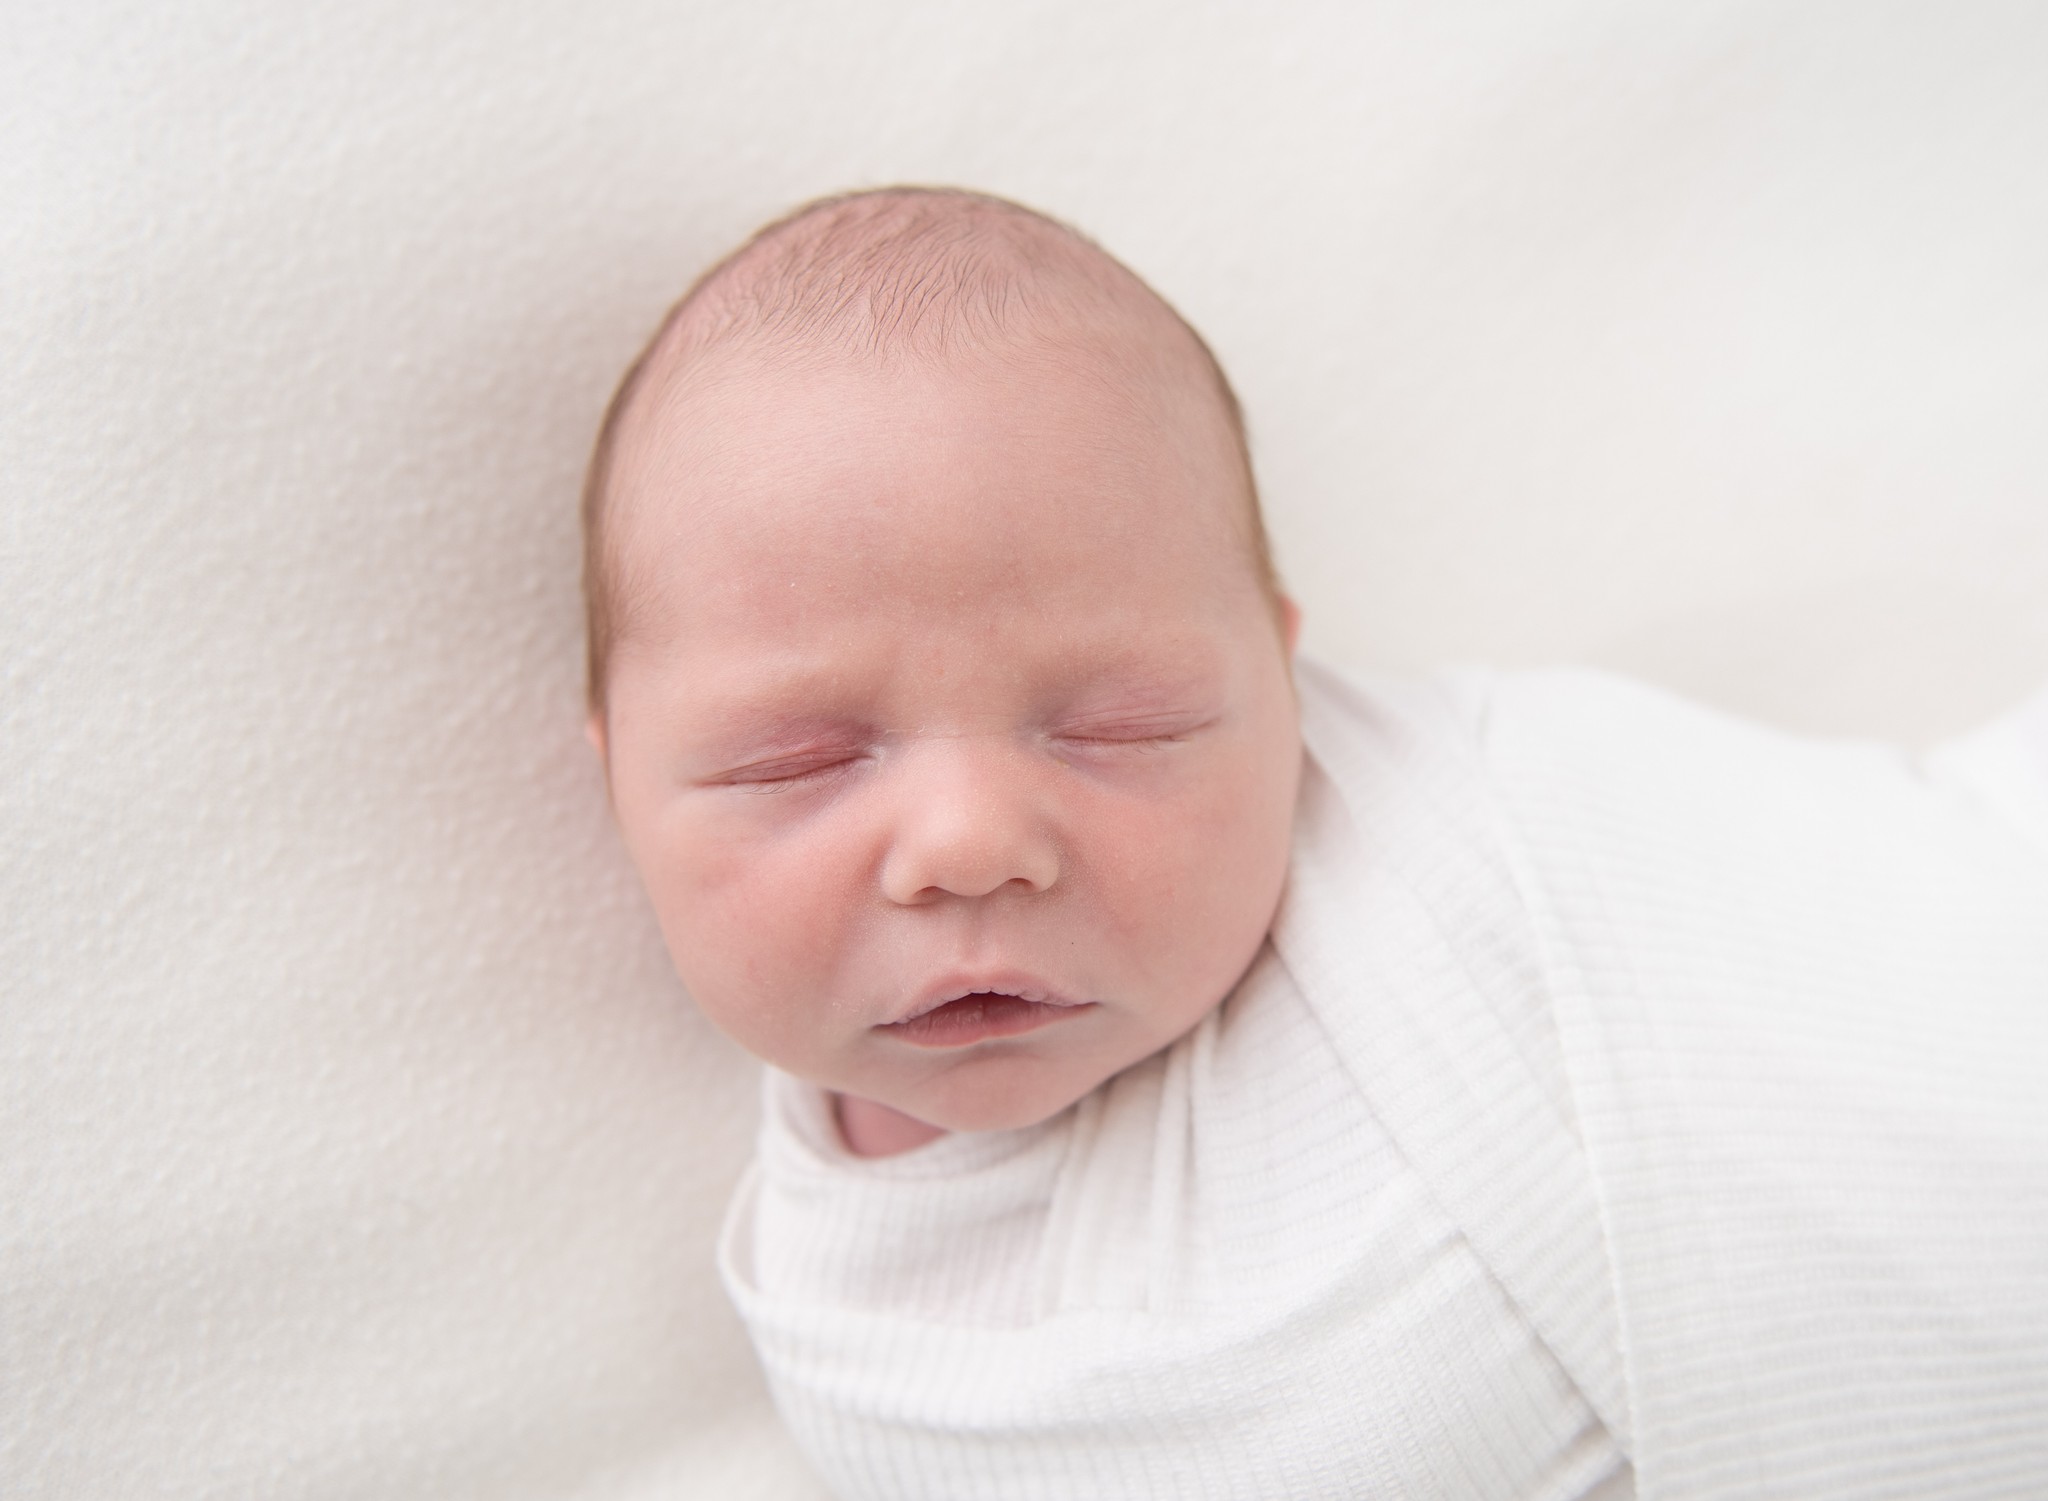 A newborn baby sleeps in a white swaddle on a white bed